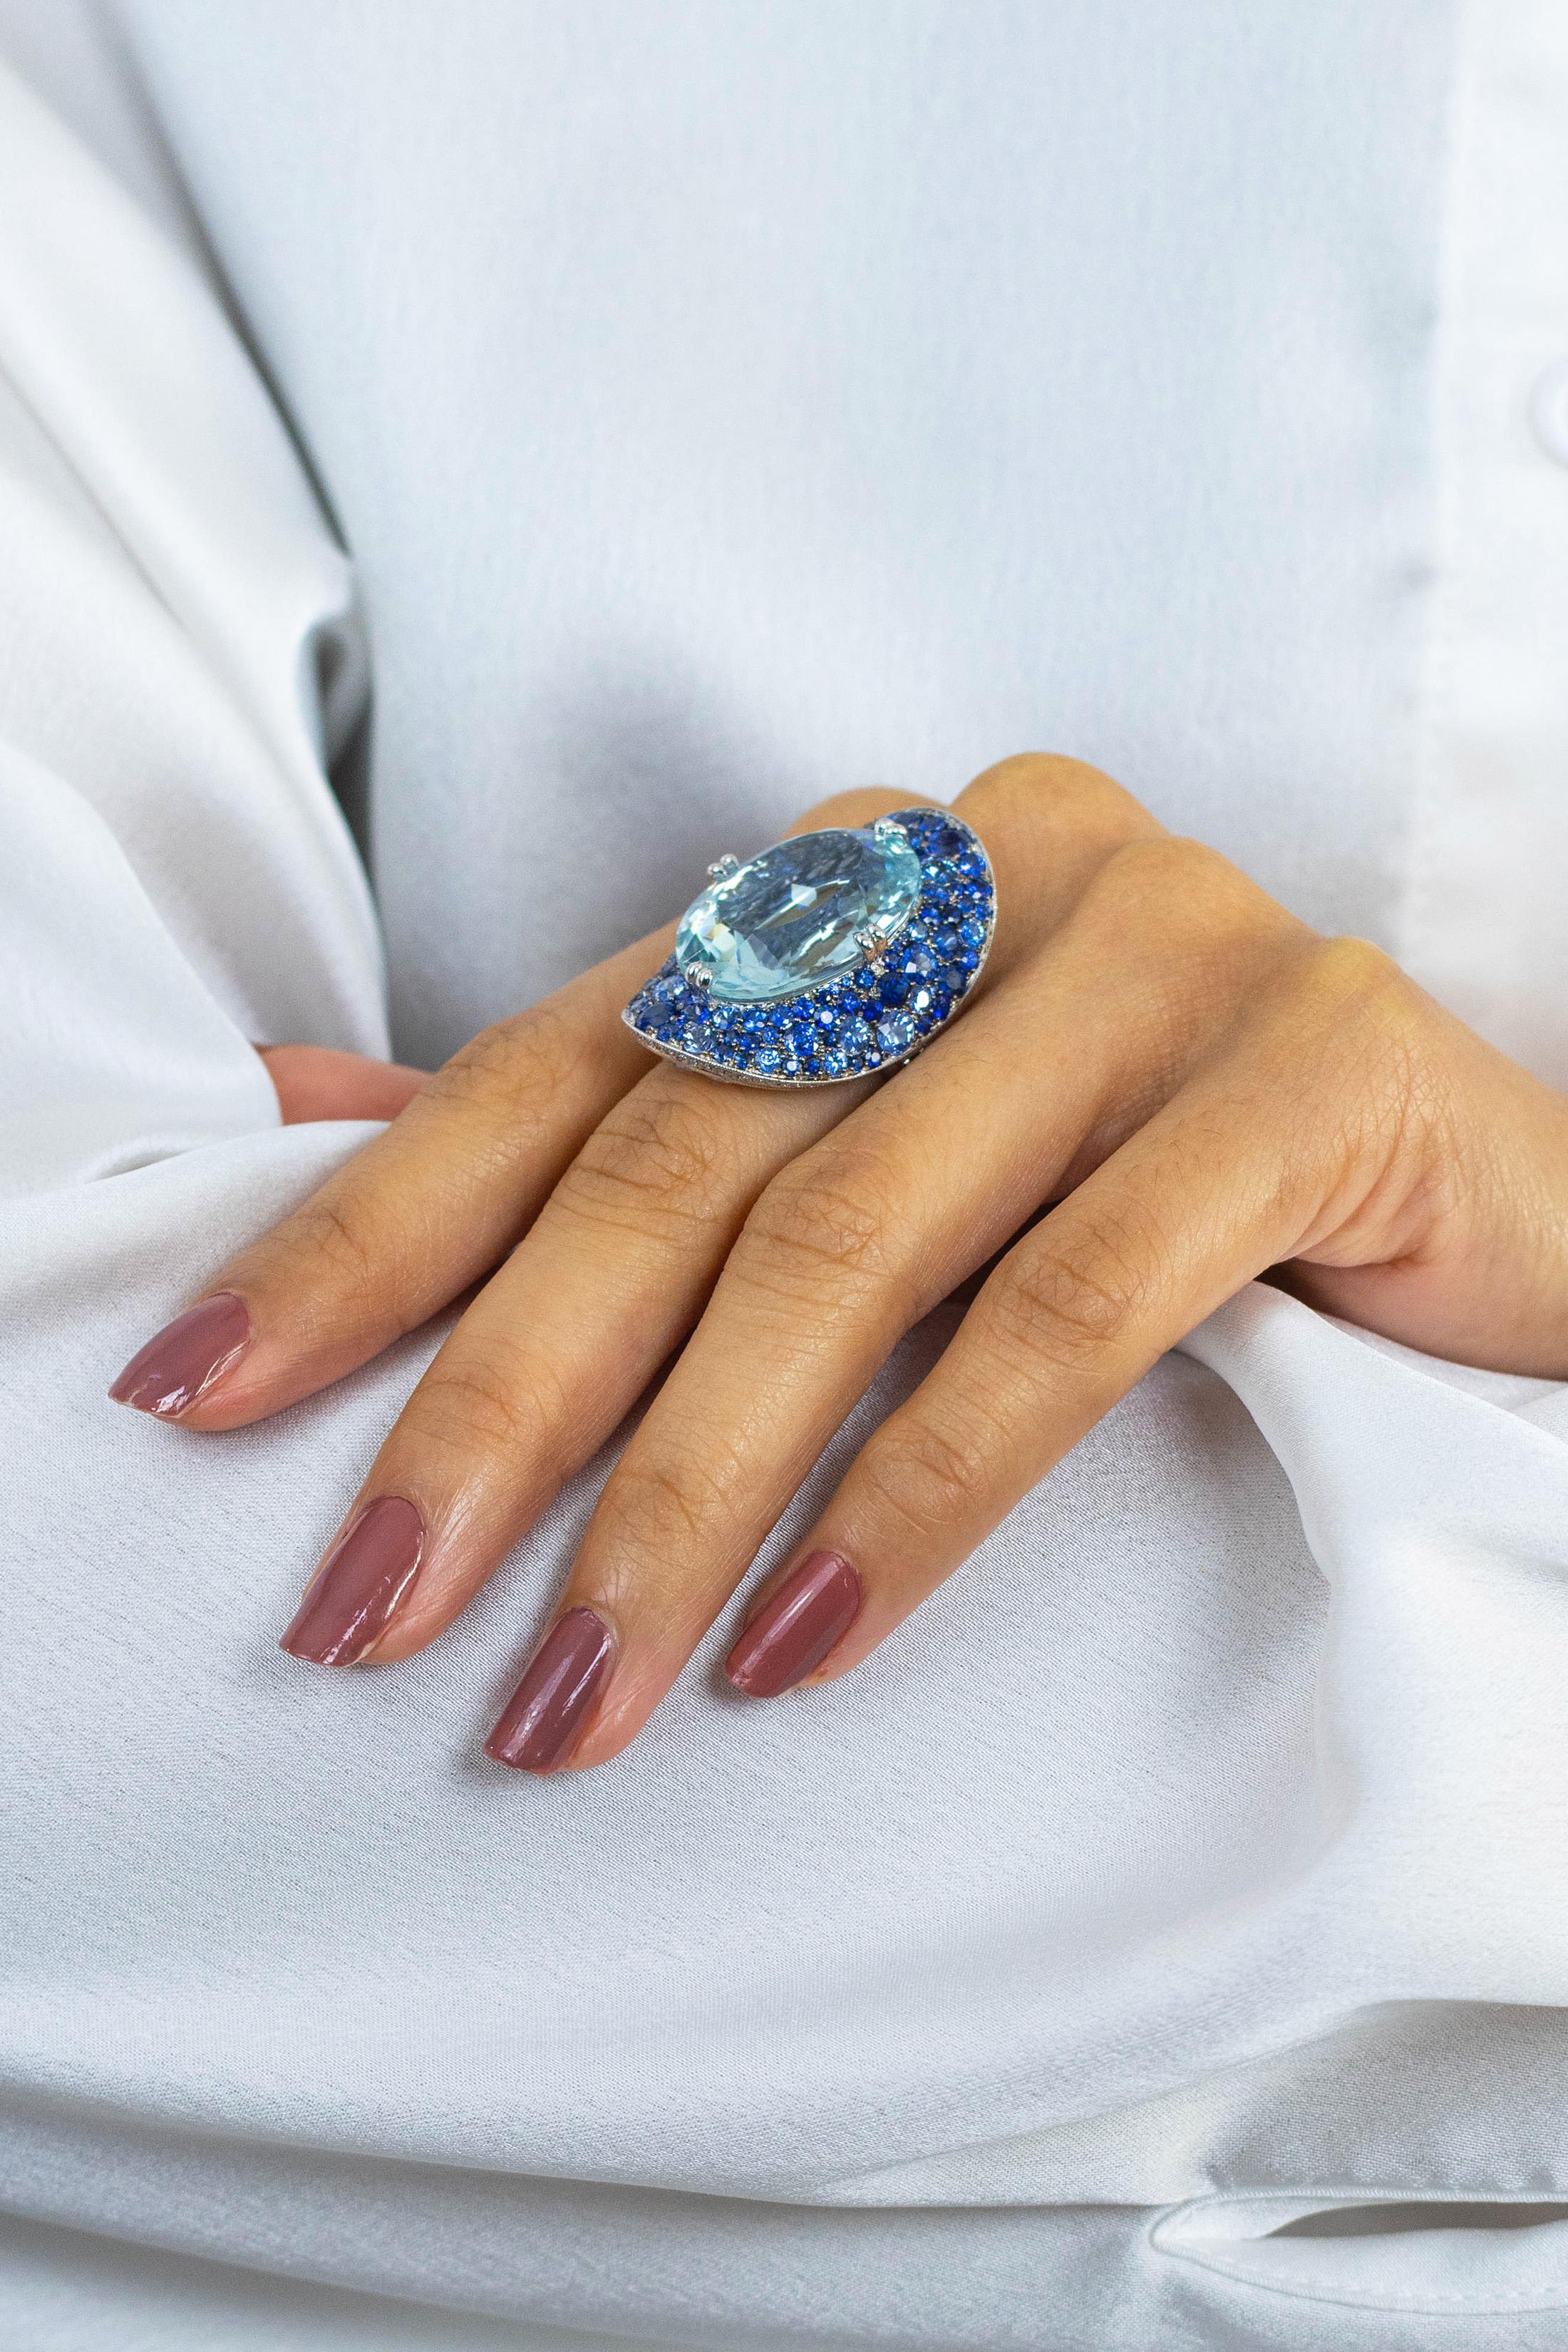 19.69 Carats Oval Cut Large Aquamarine with Sapphire and Diamond 'Bonnet' Ring For Sale 3